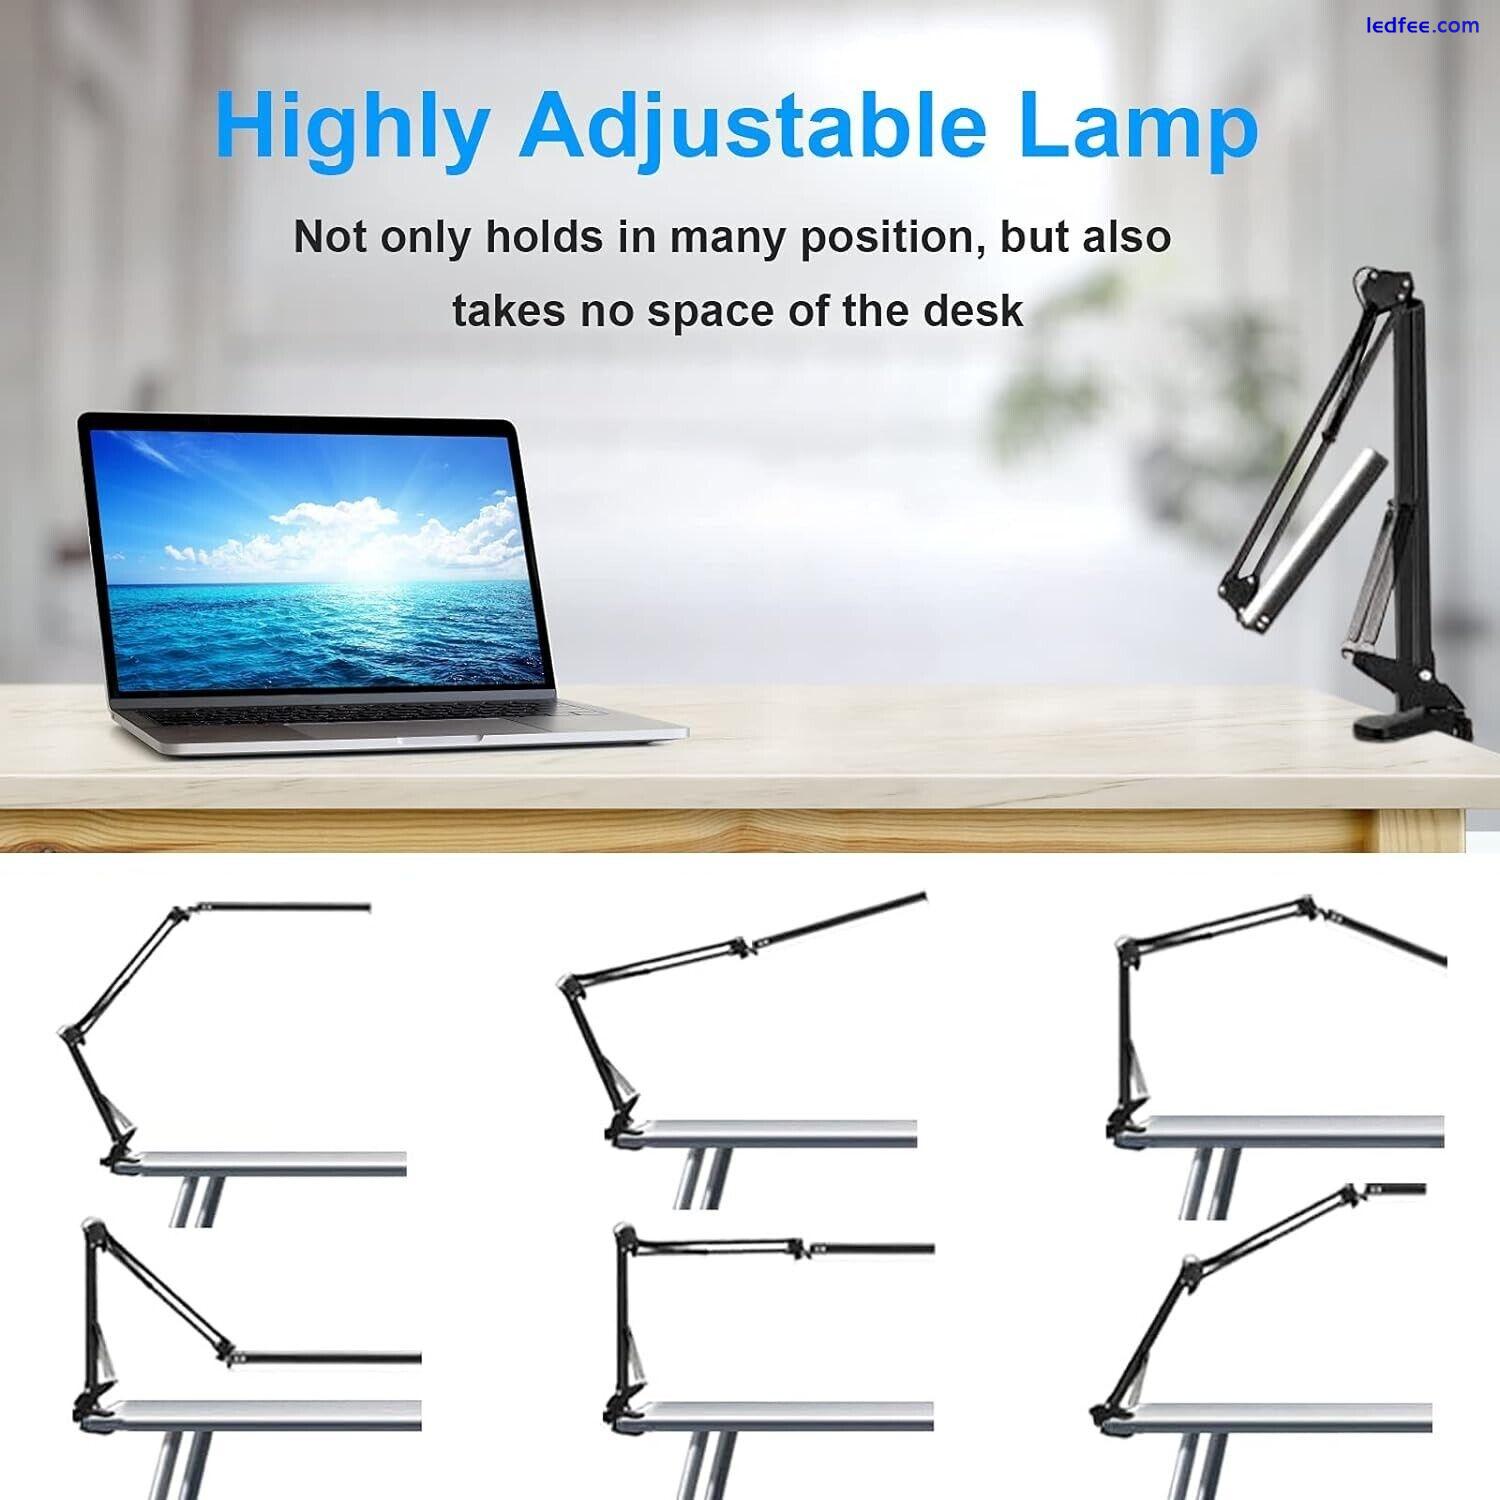 HaFundy LED Desk Lamp for Home/Office - NIB - SHIPS FREE!! 1 